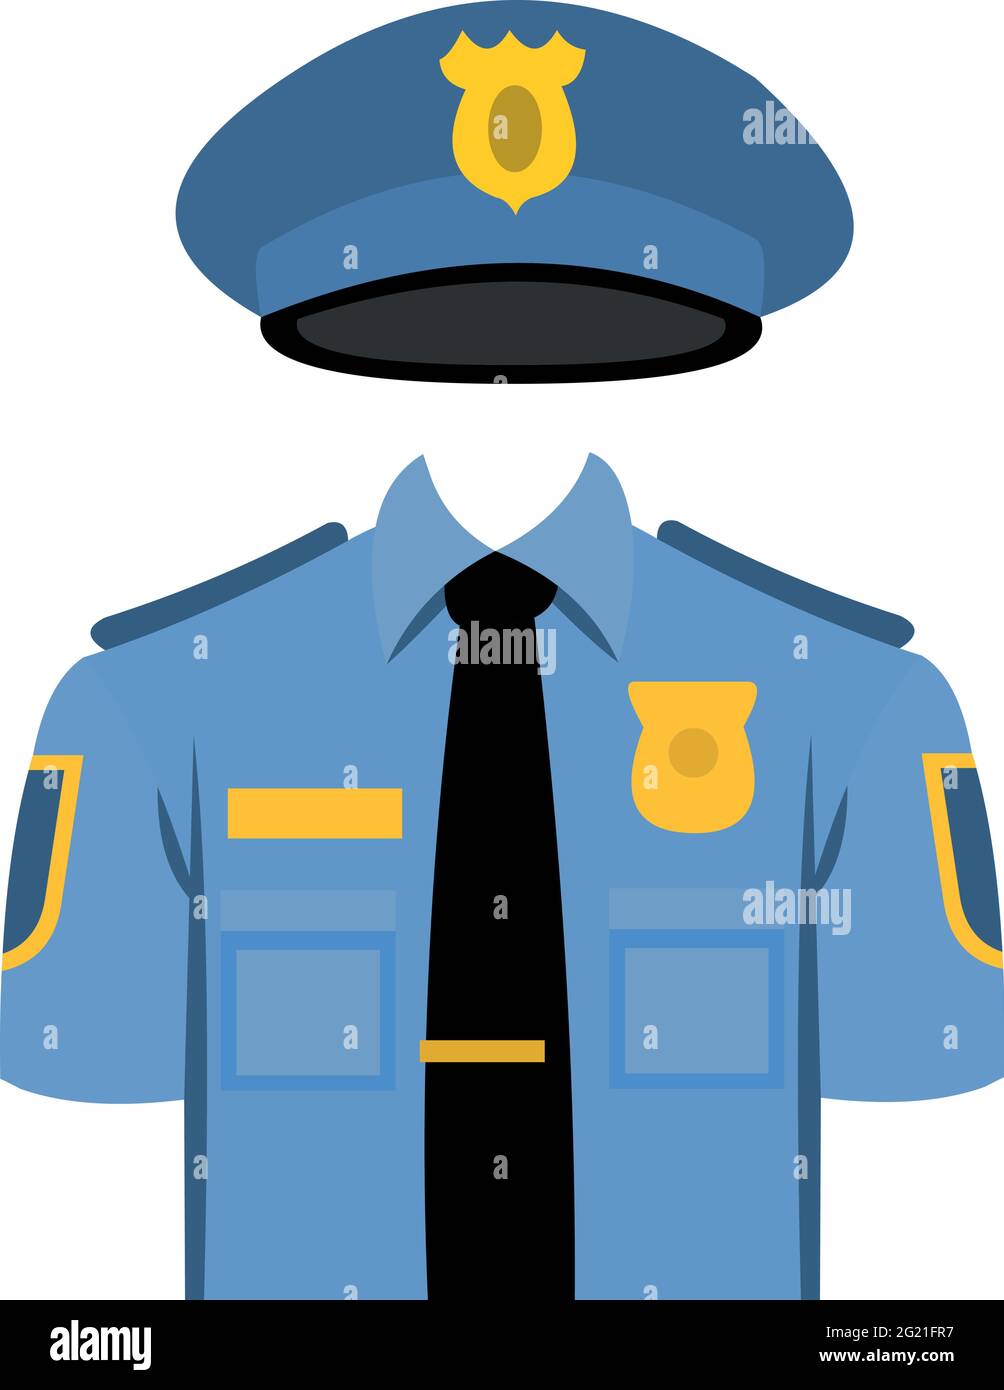 Vector illustration of police uniform and hat Stock Vector